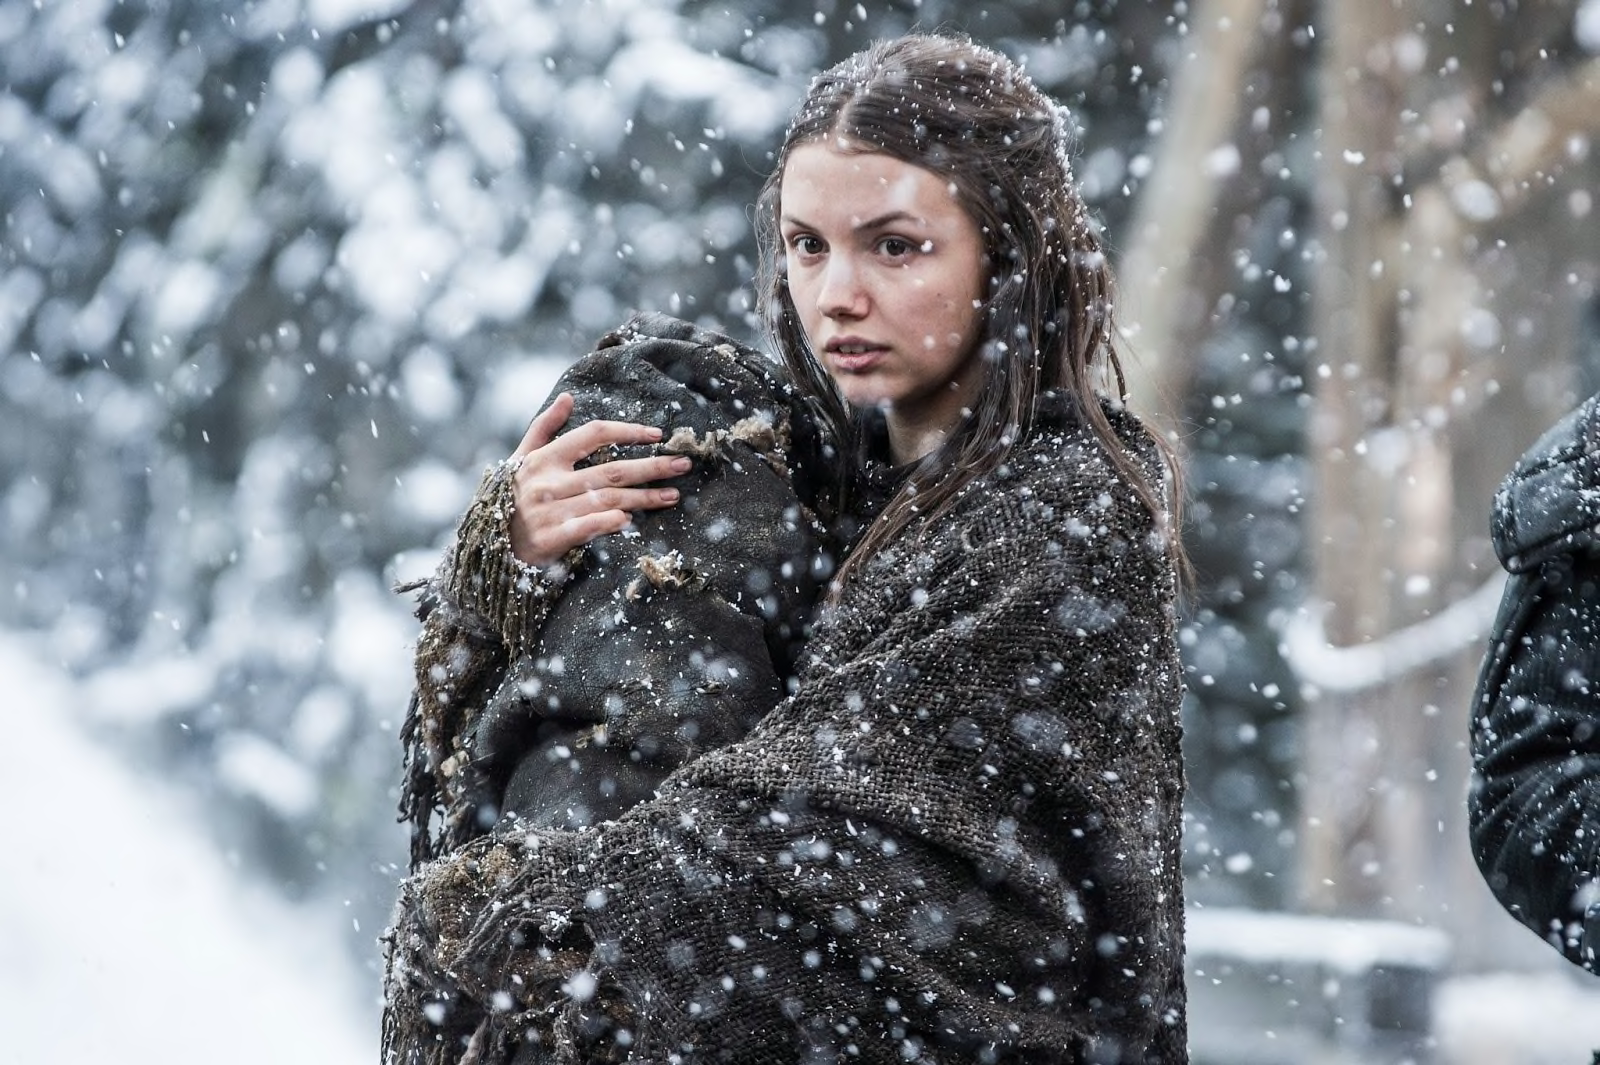 Gilly a song of ice and fire